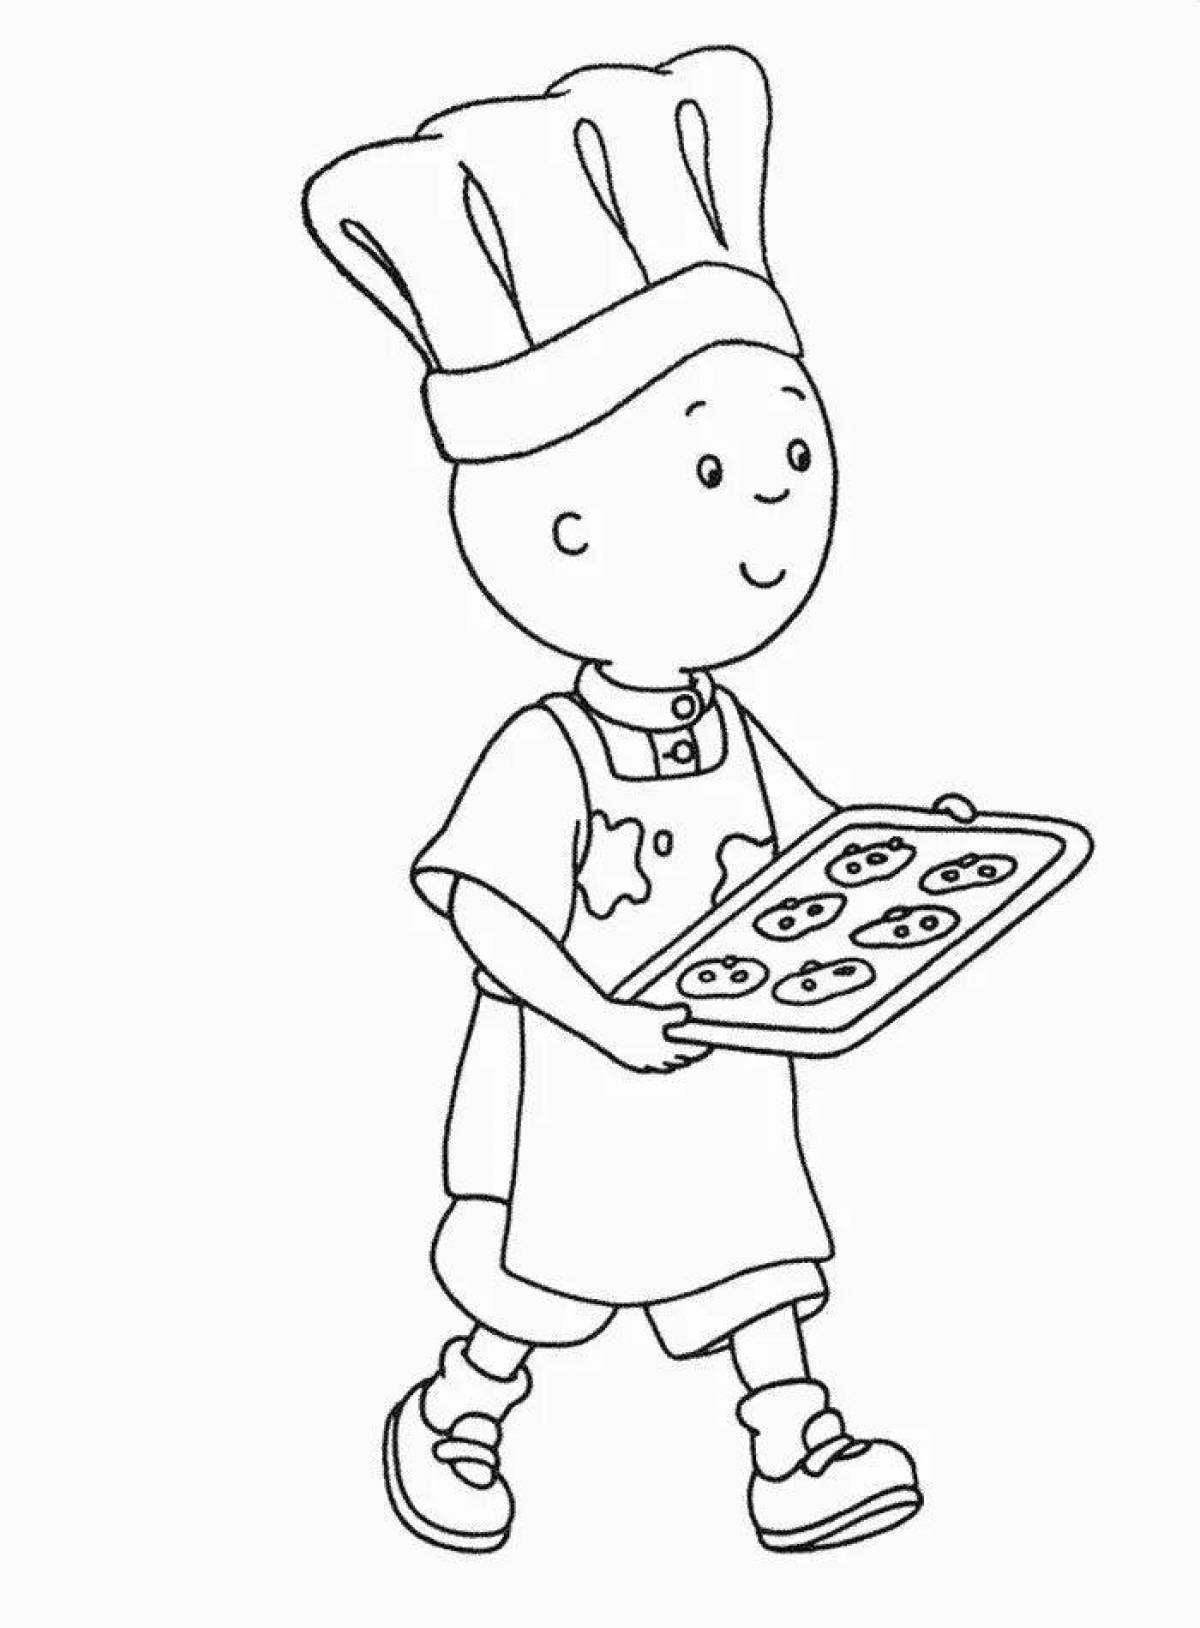 Cook coloring book